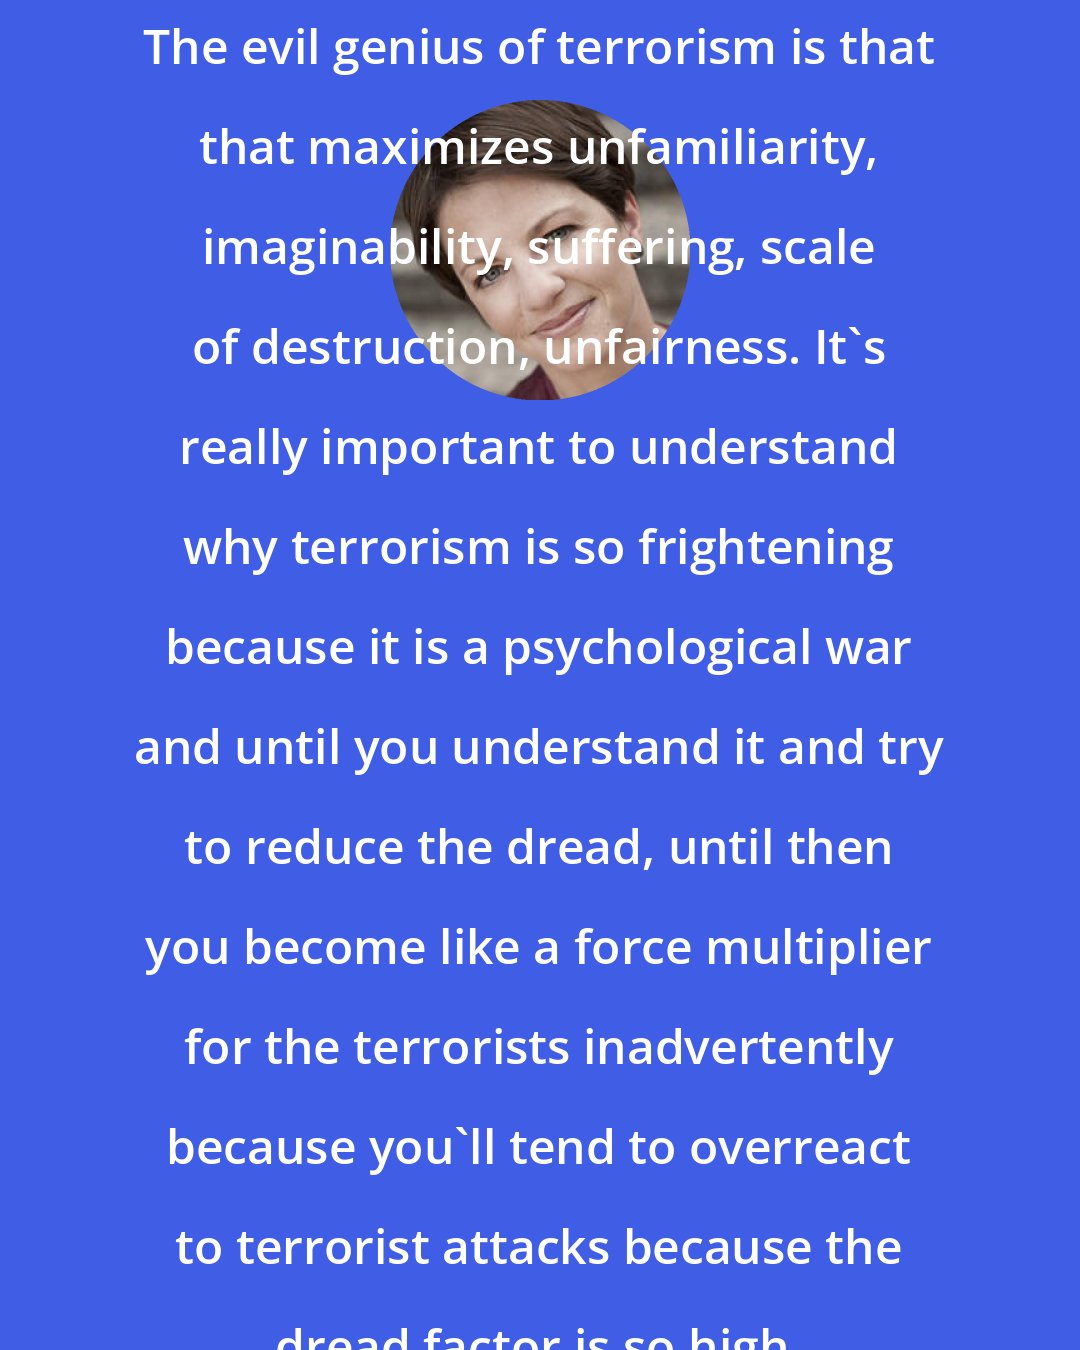 Amanda Ripley: The evil genius of terrorism is that that maximizes unfamiliarity, imaginability, suffering, scale of destruction, unfairness. It's really important to understand why terrorism is so frightening because it is a psychological war and until you understand it and try to reduce the dread, until then you become like a force multiplier for the terrorists inadvertently because you'll tend to overreact to terrorist attacks because the dread factor is so high.